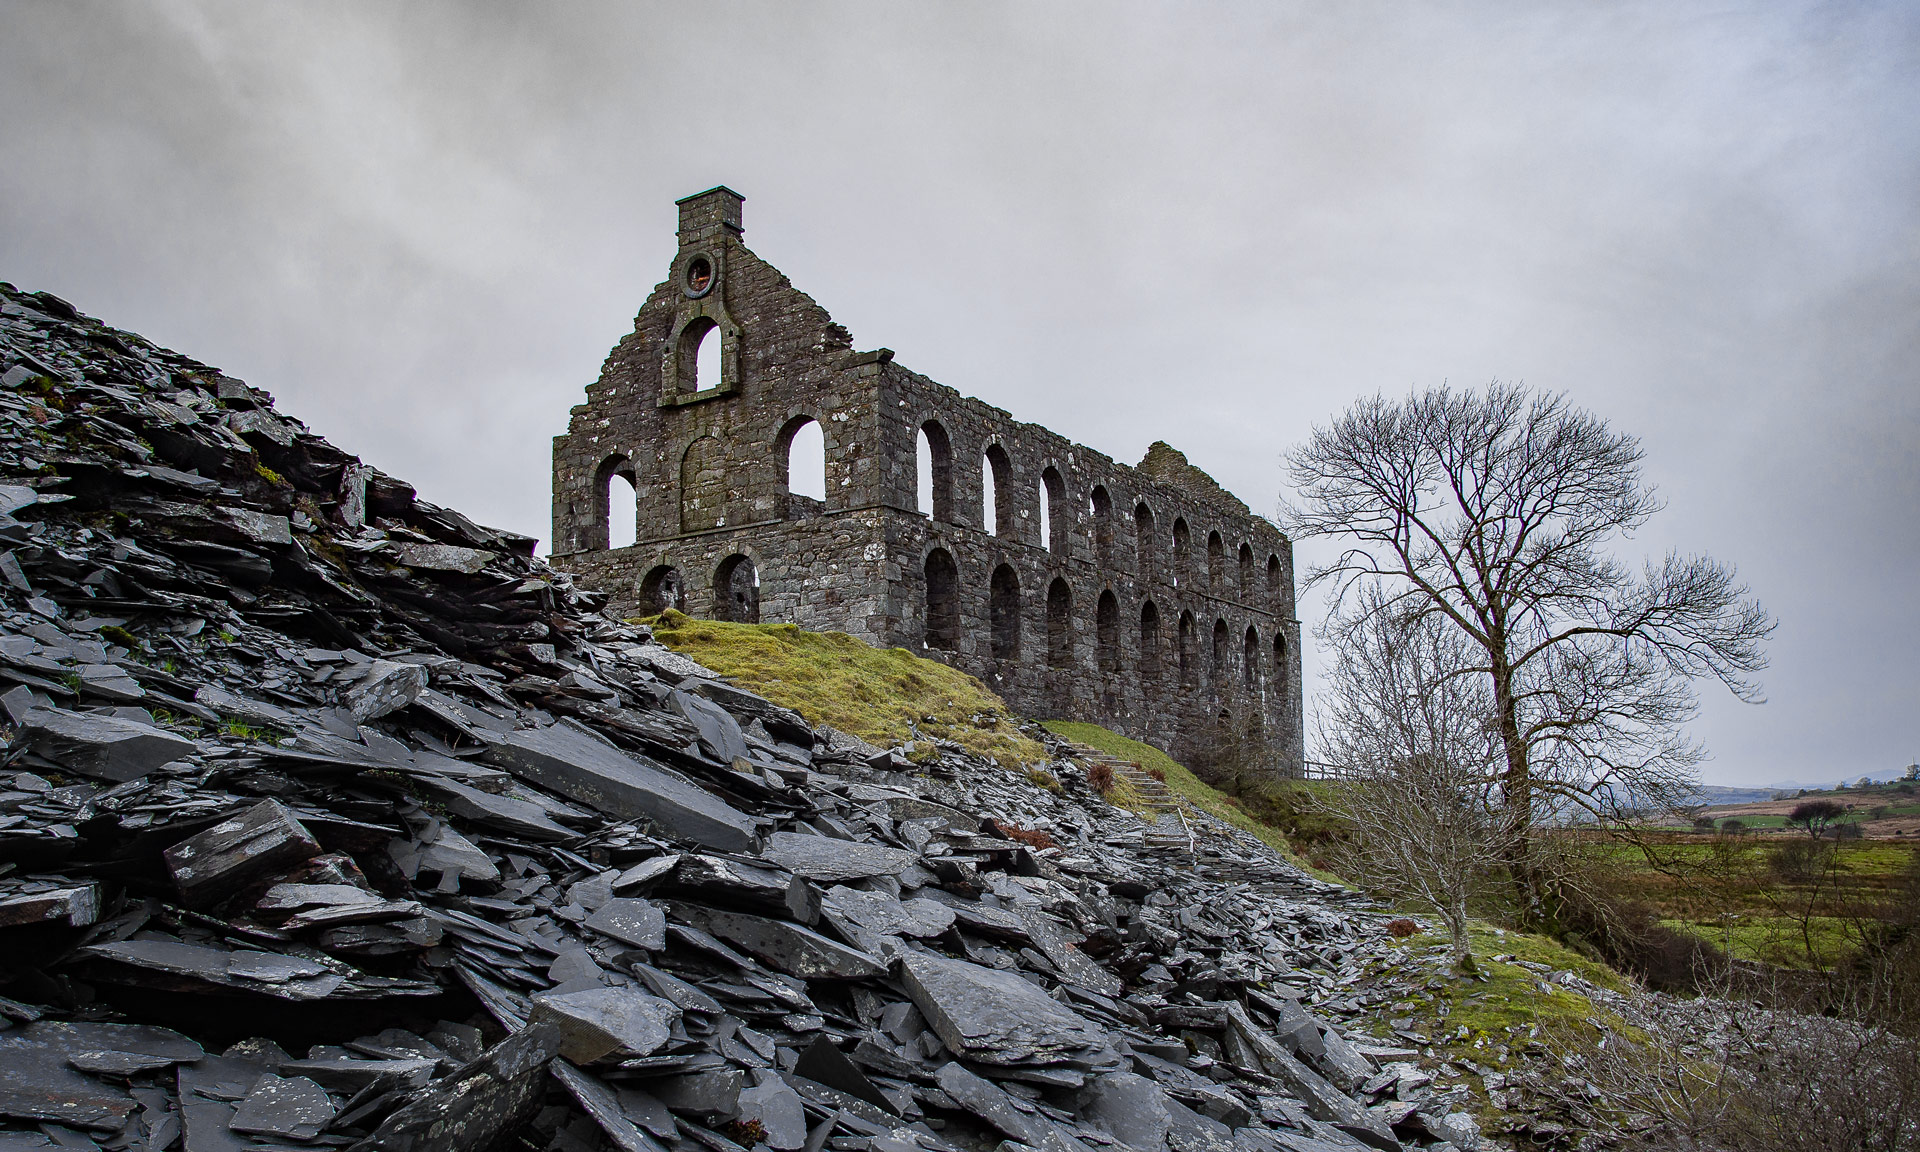 The remains of the slate industry are evident in many places throughout the National Park.